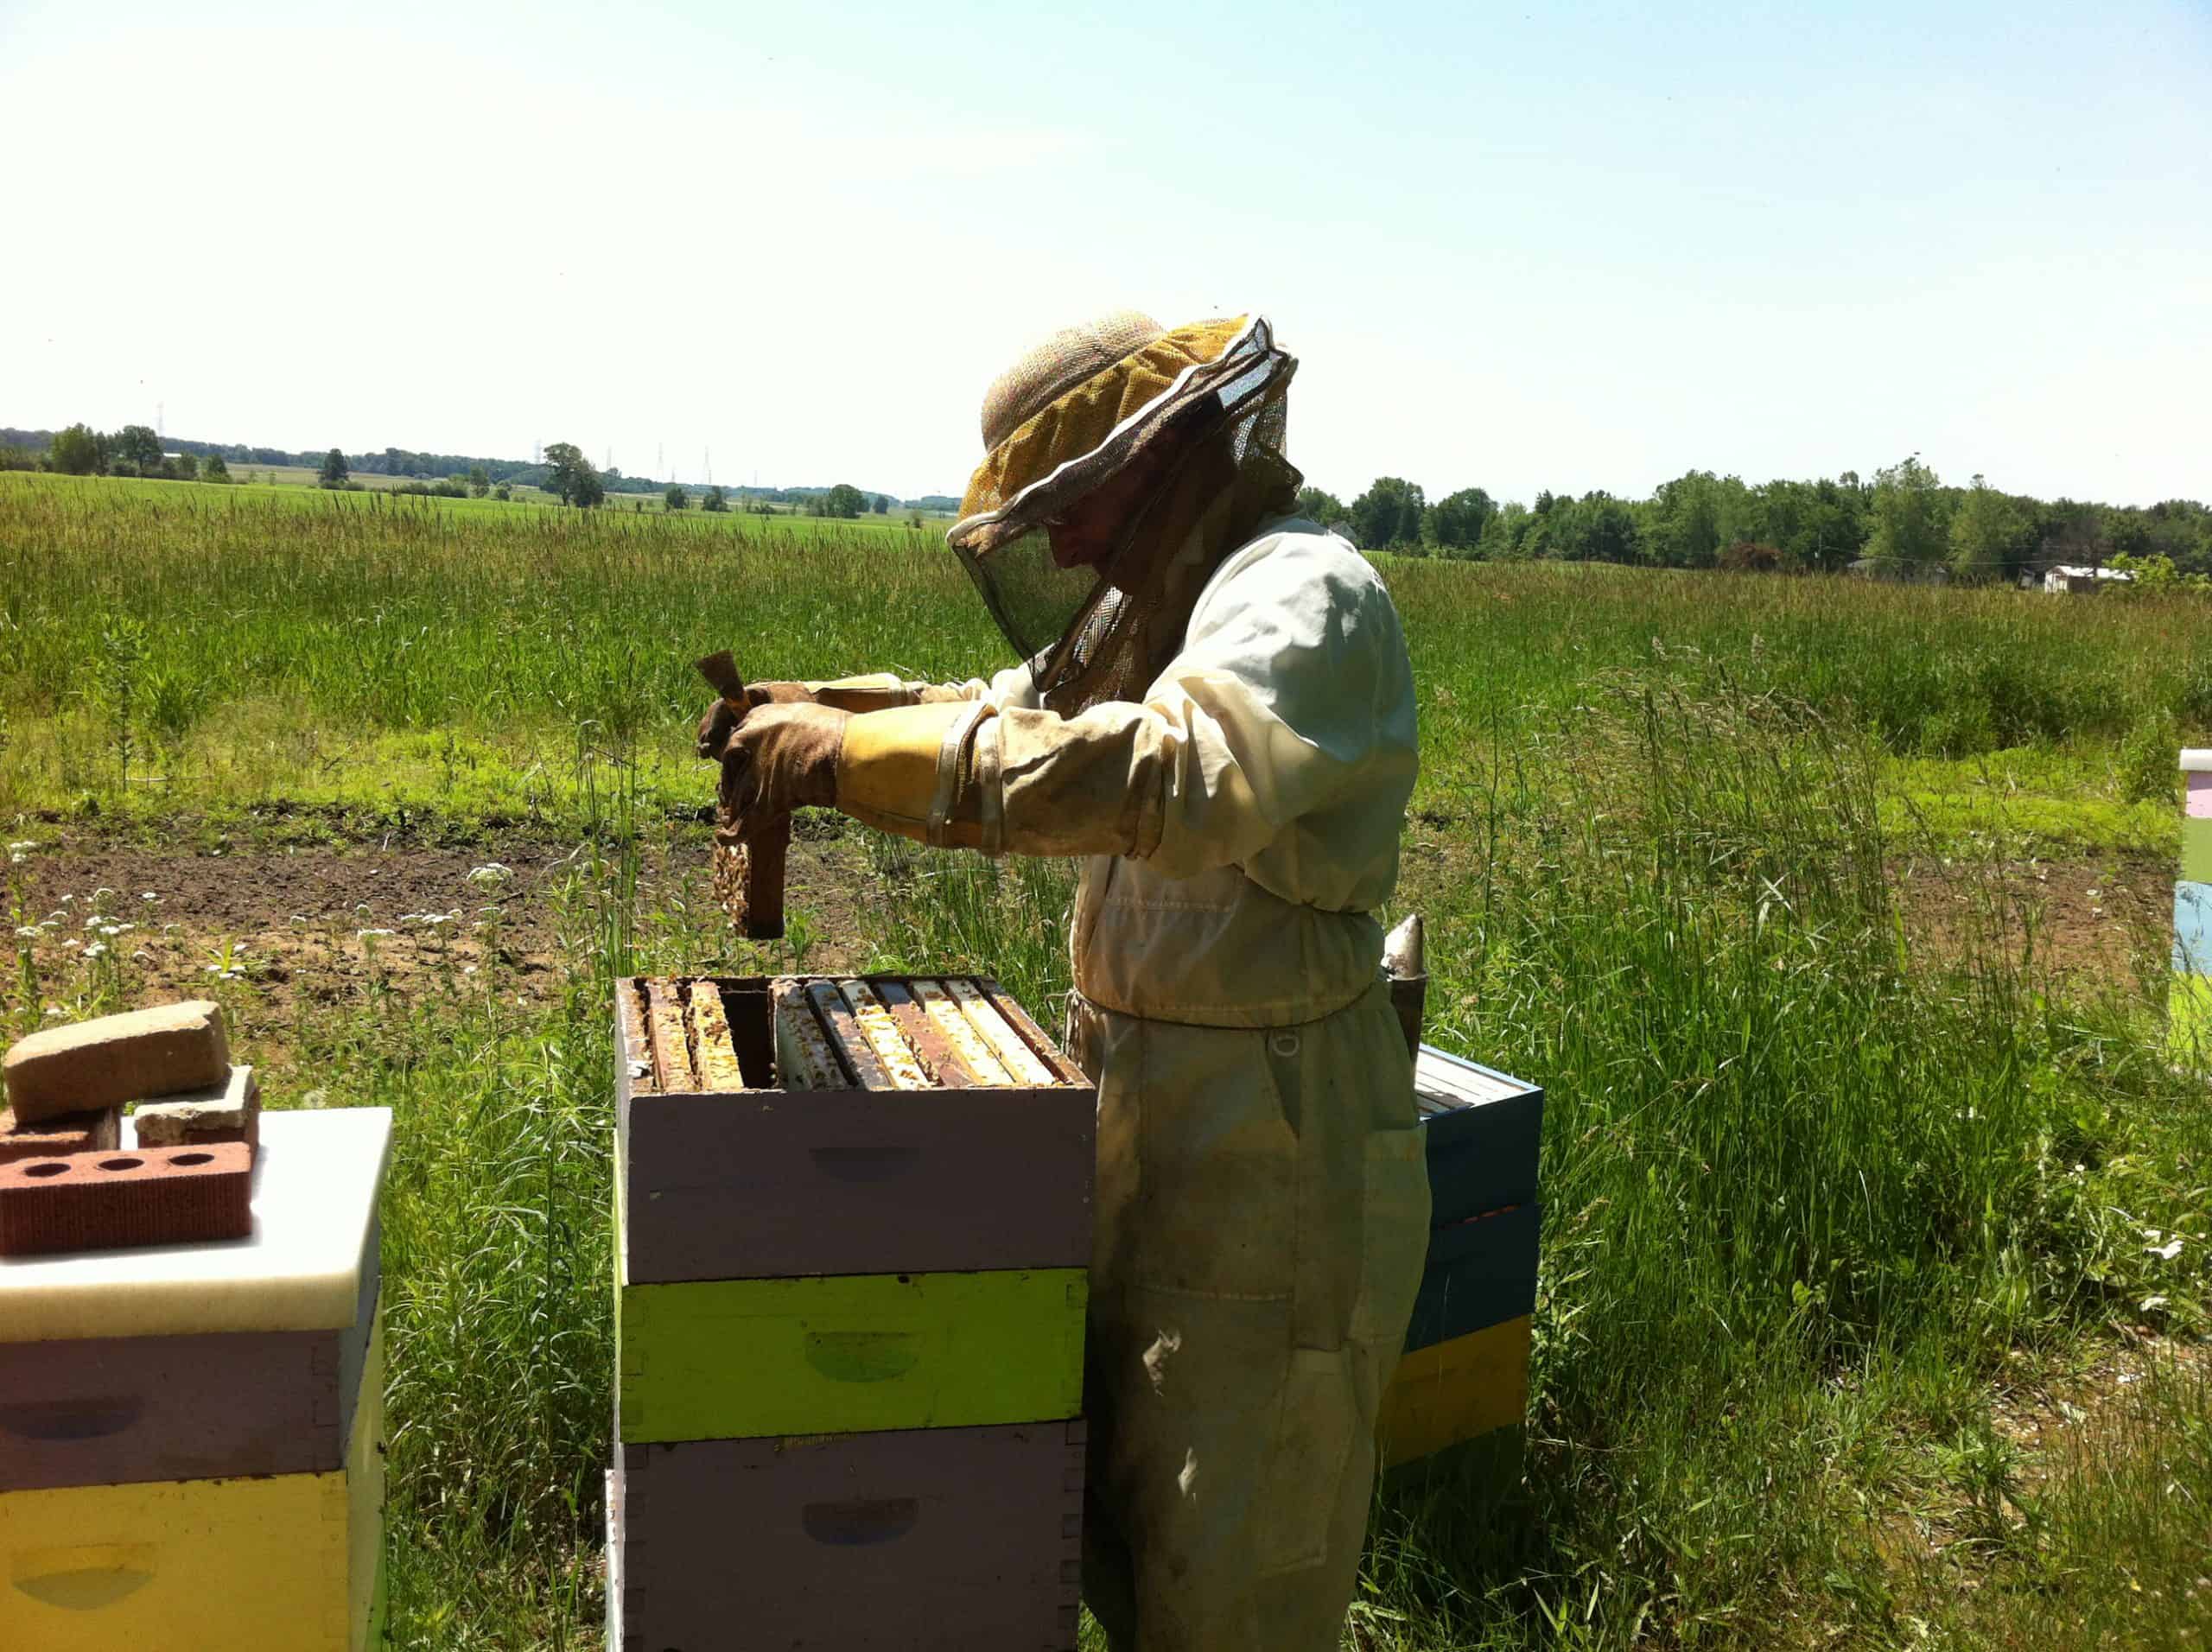 Tutorial (1): So you want to be a beekeeper?